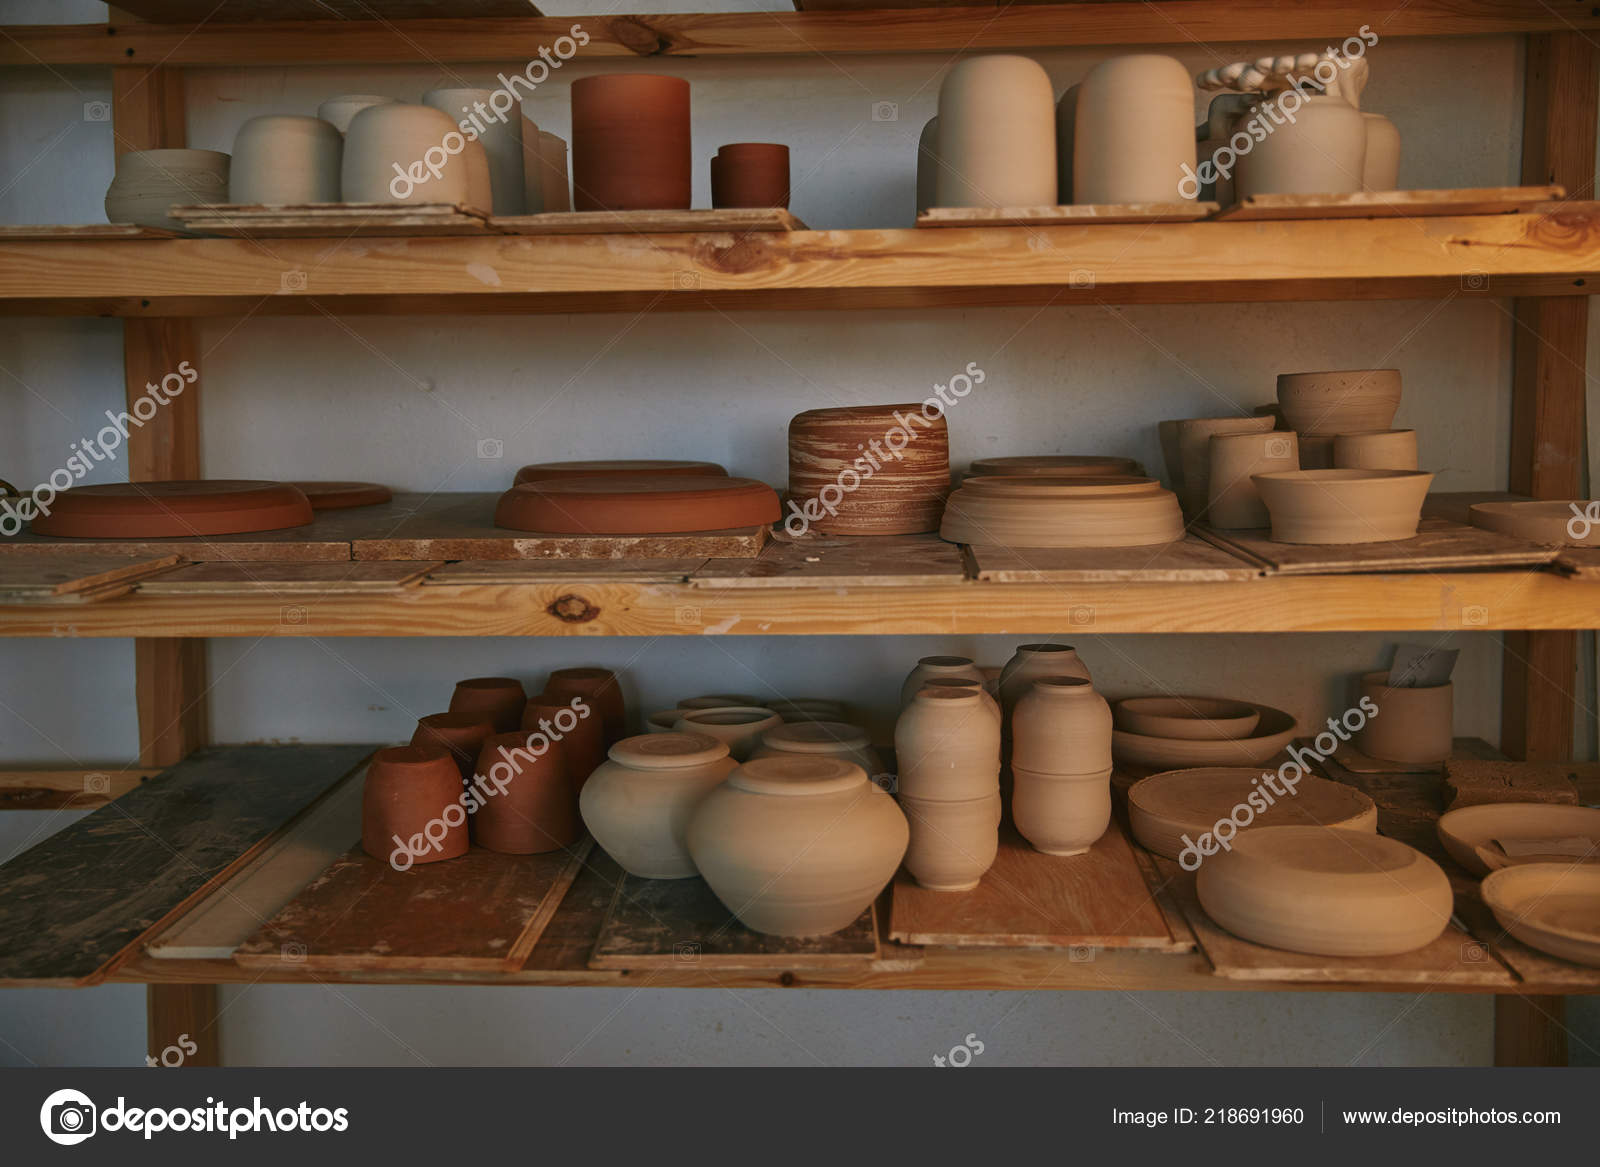 Range of Pottery Molds on a Wooden Shelf in Potters Studio. for